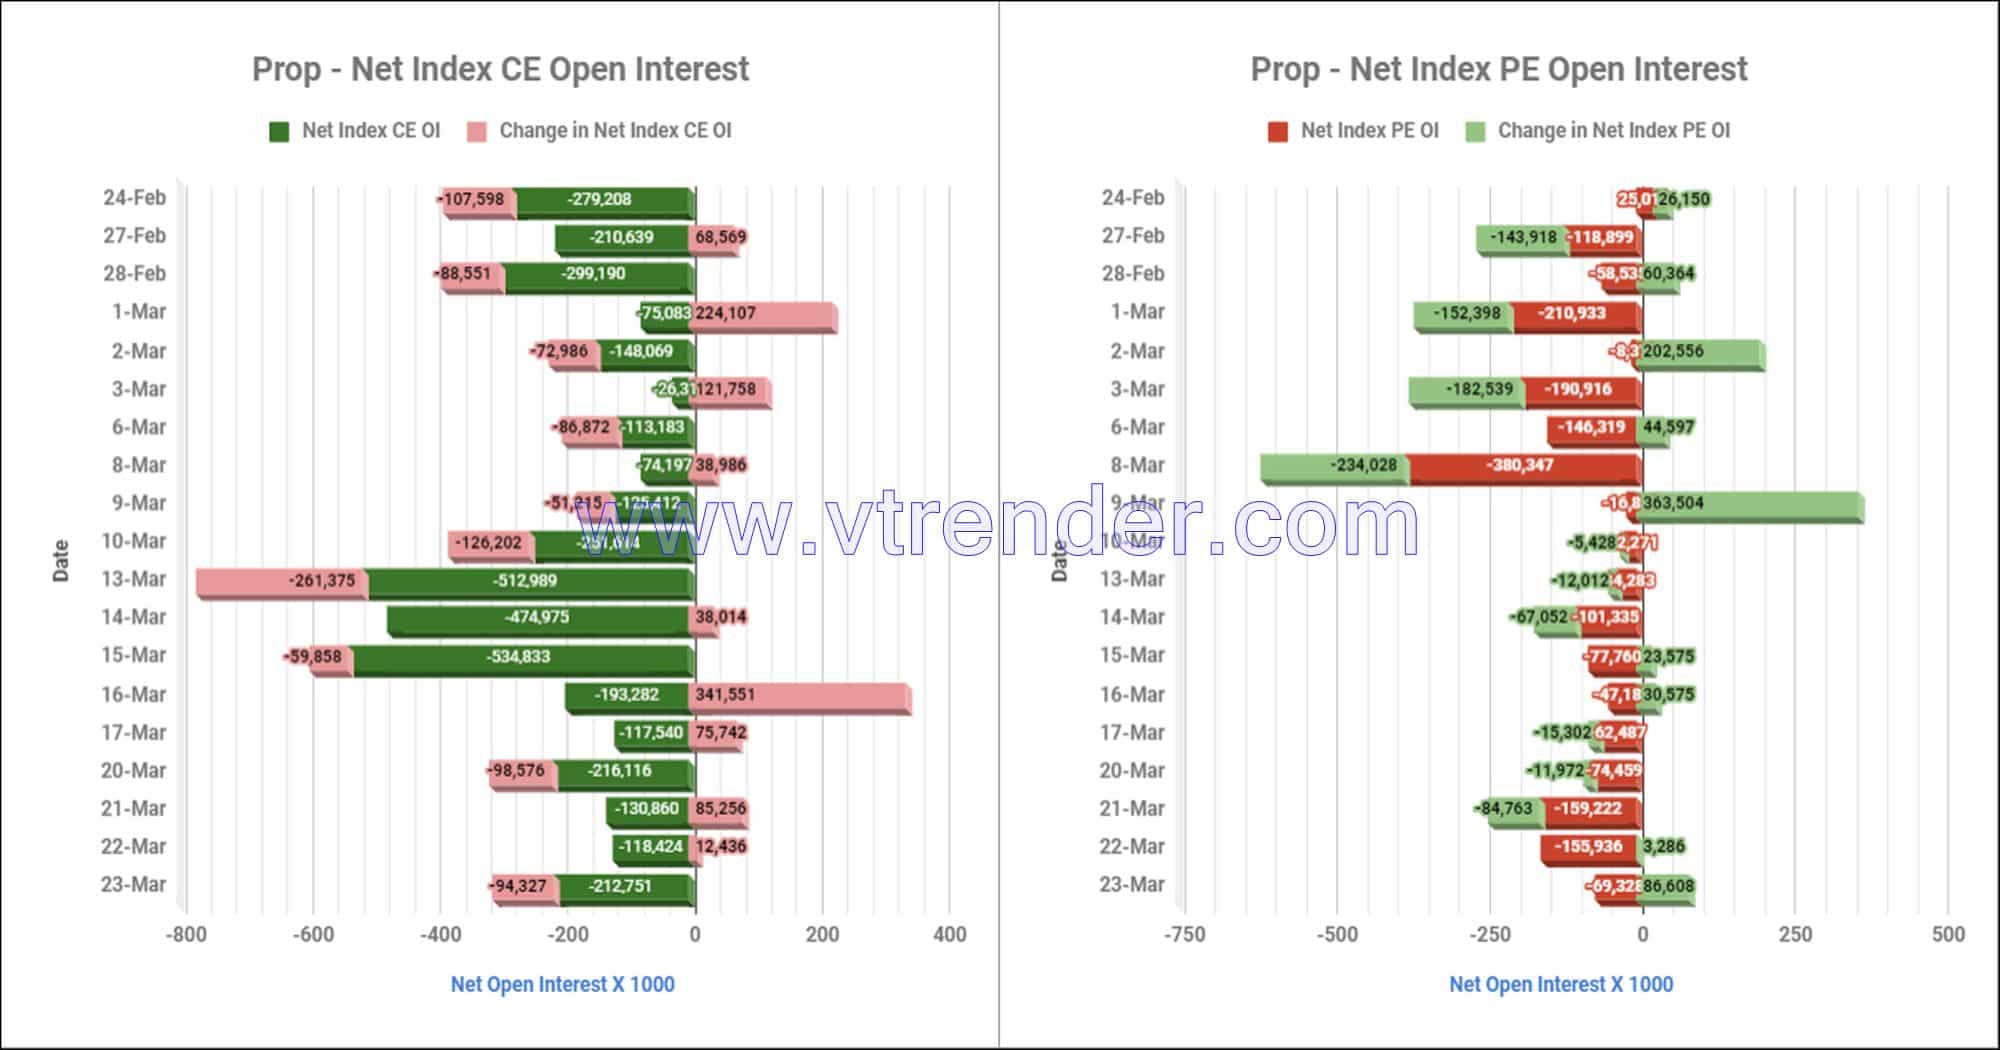 Proinop23Mar Participantwise Net Open Interest And Net Equity Investments – 23Rd Mar 2023 Client, Equity, Fii, Index Futures, Index Options, Open Interest, Prop